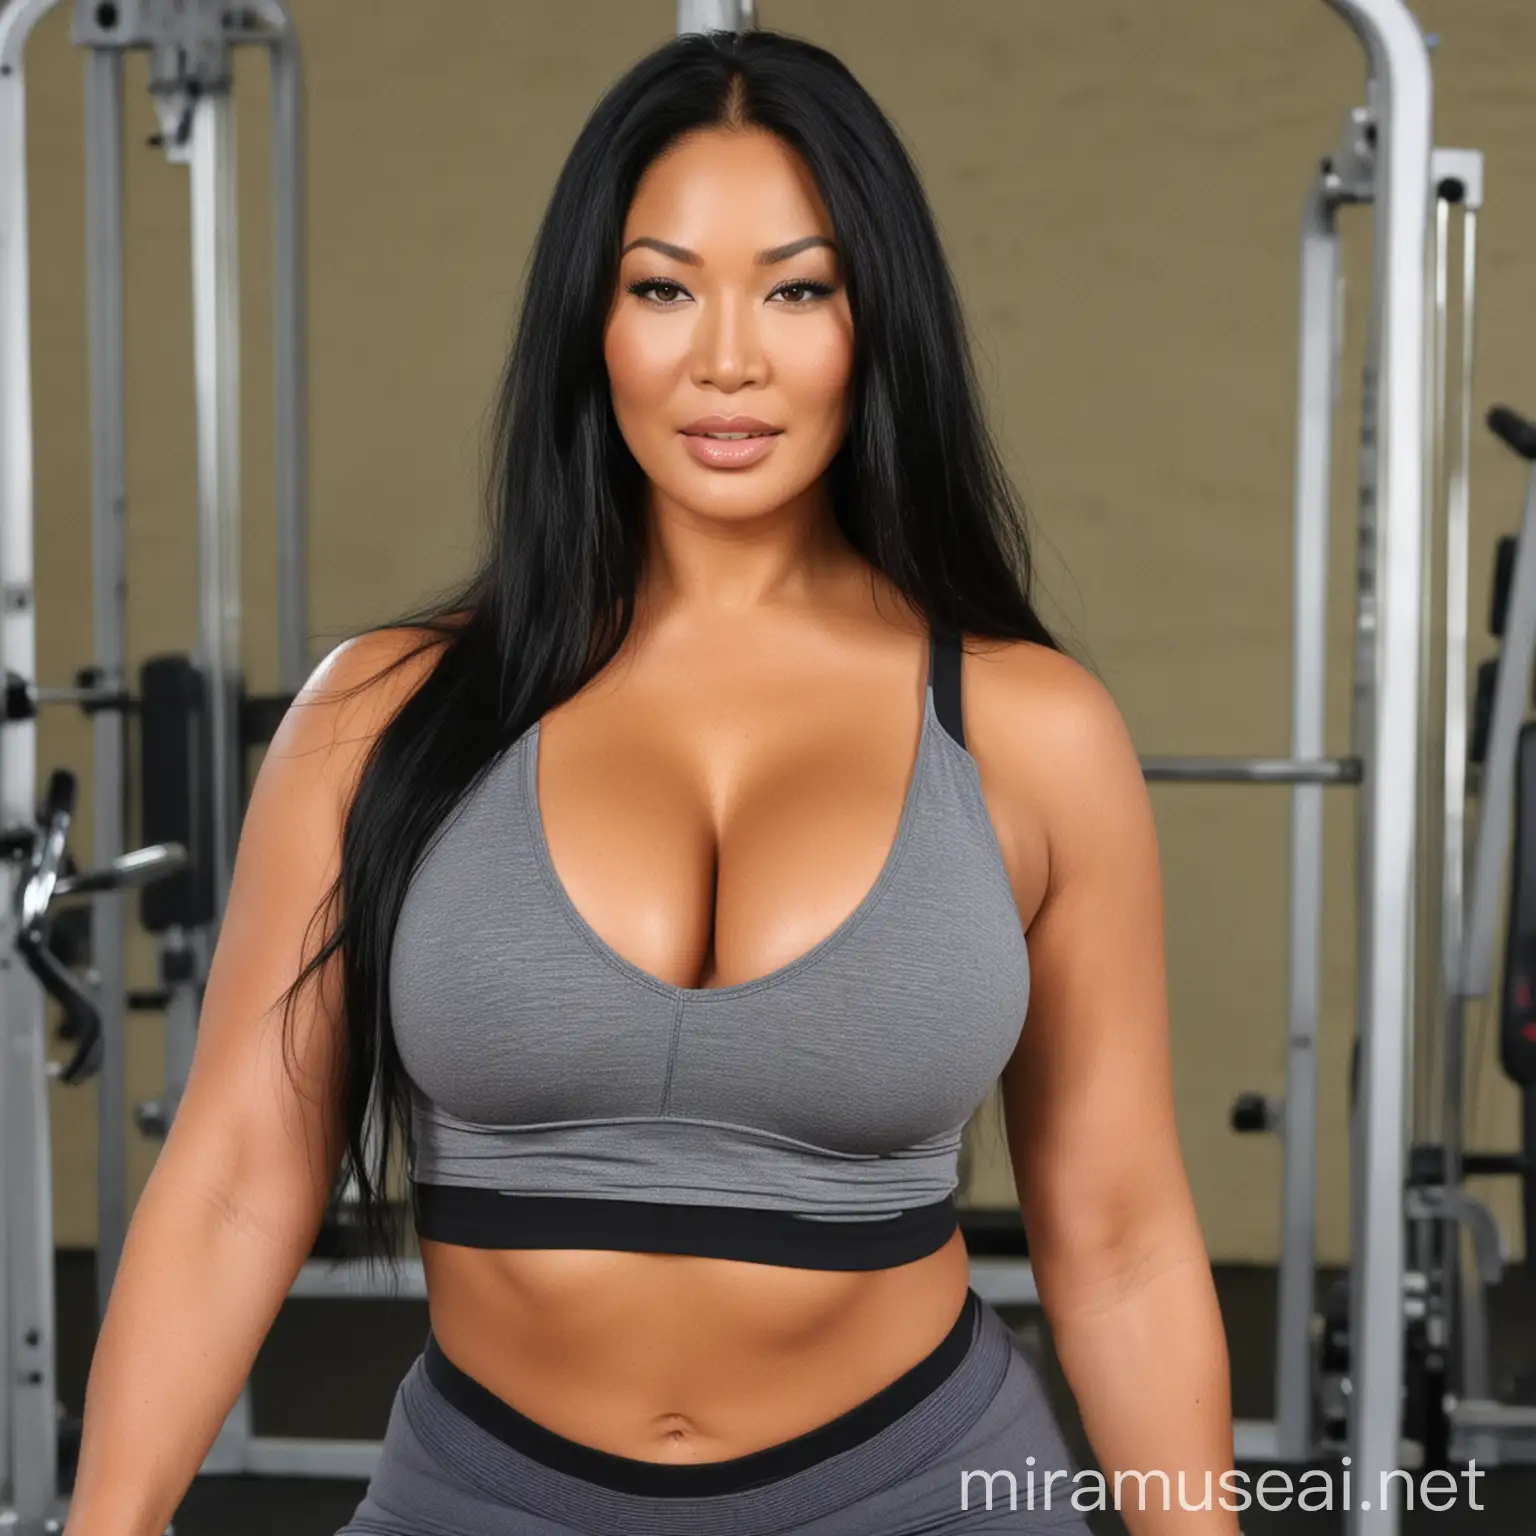 Kimora Lee Simmons wearing a tank top, in the gym, straight long hair, bbw, large breasts, showing cleavage, zoomed in from the waist up